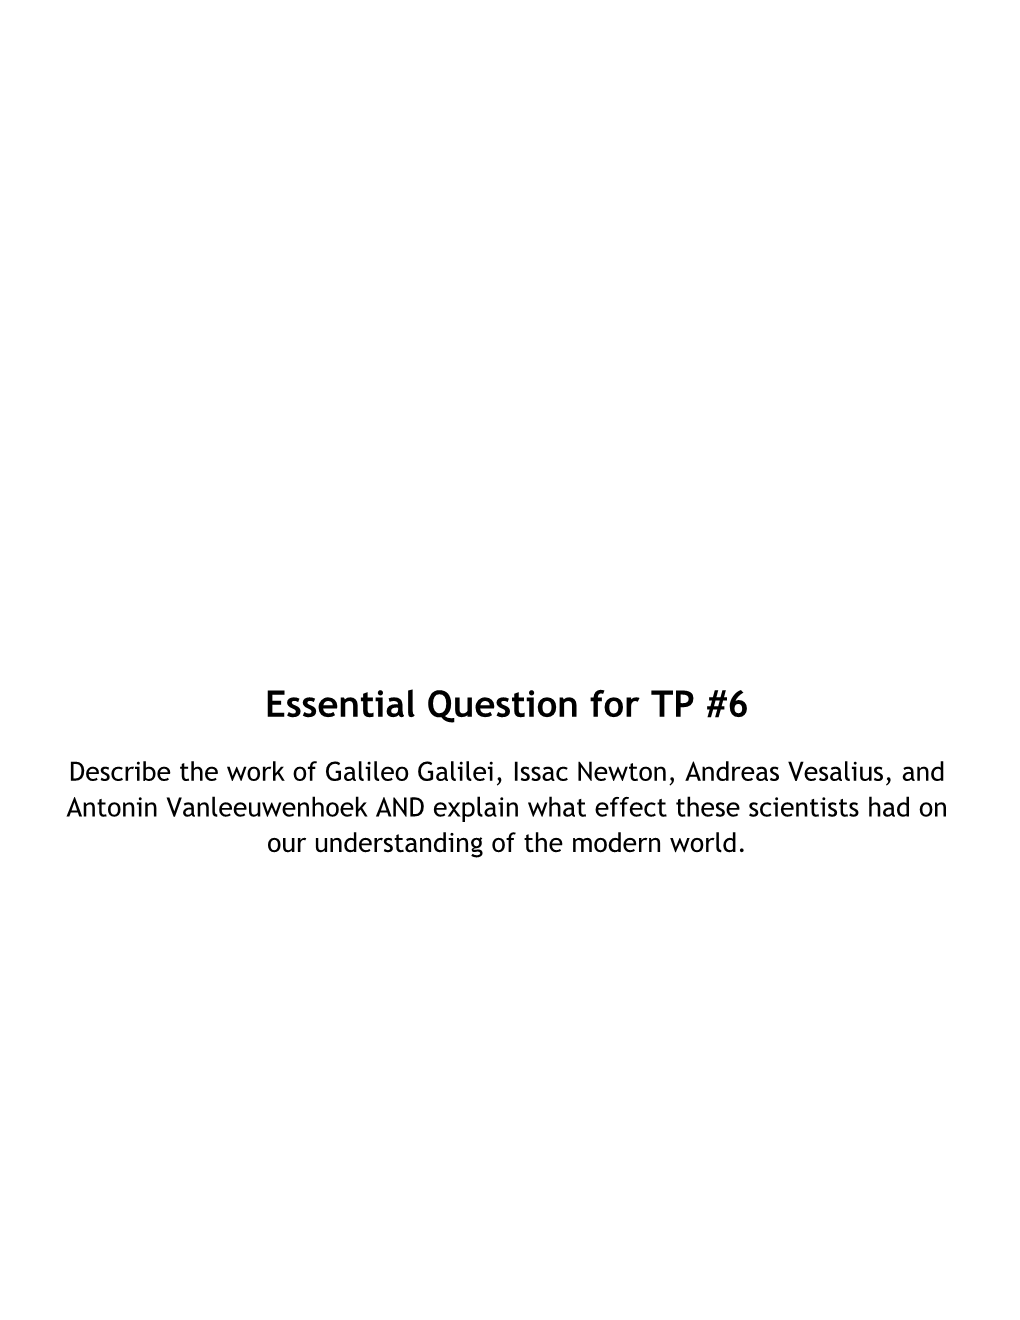 Essential Question for TP #6